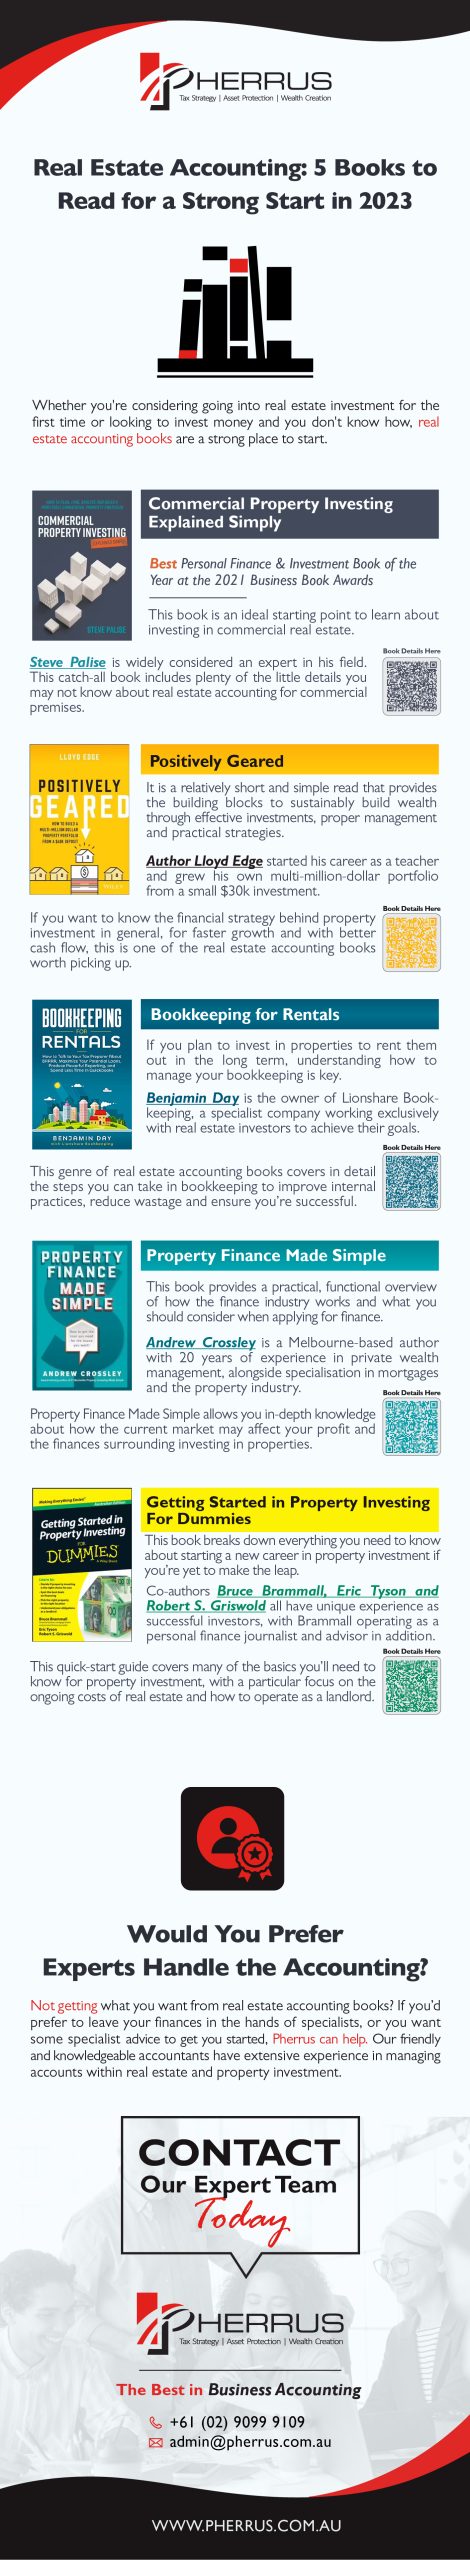 Real Estate Accounting Books - 5 To Get You Started infographic